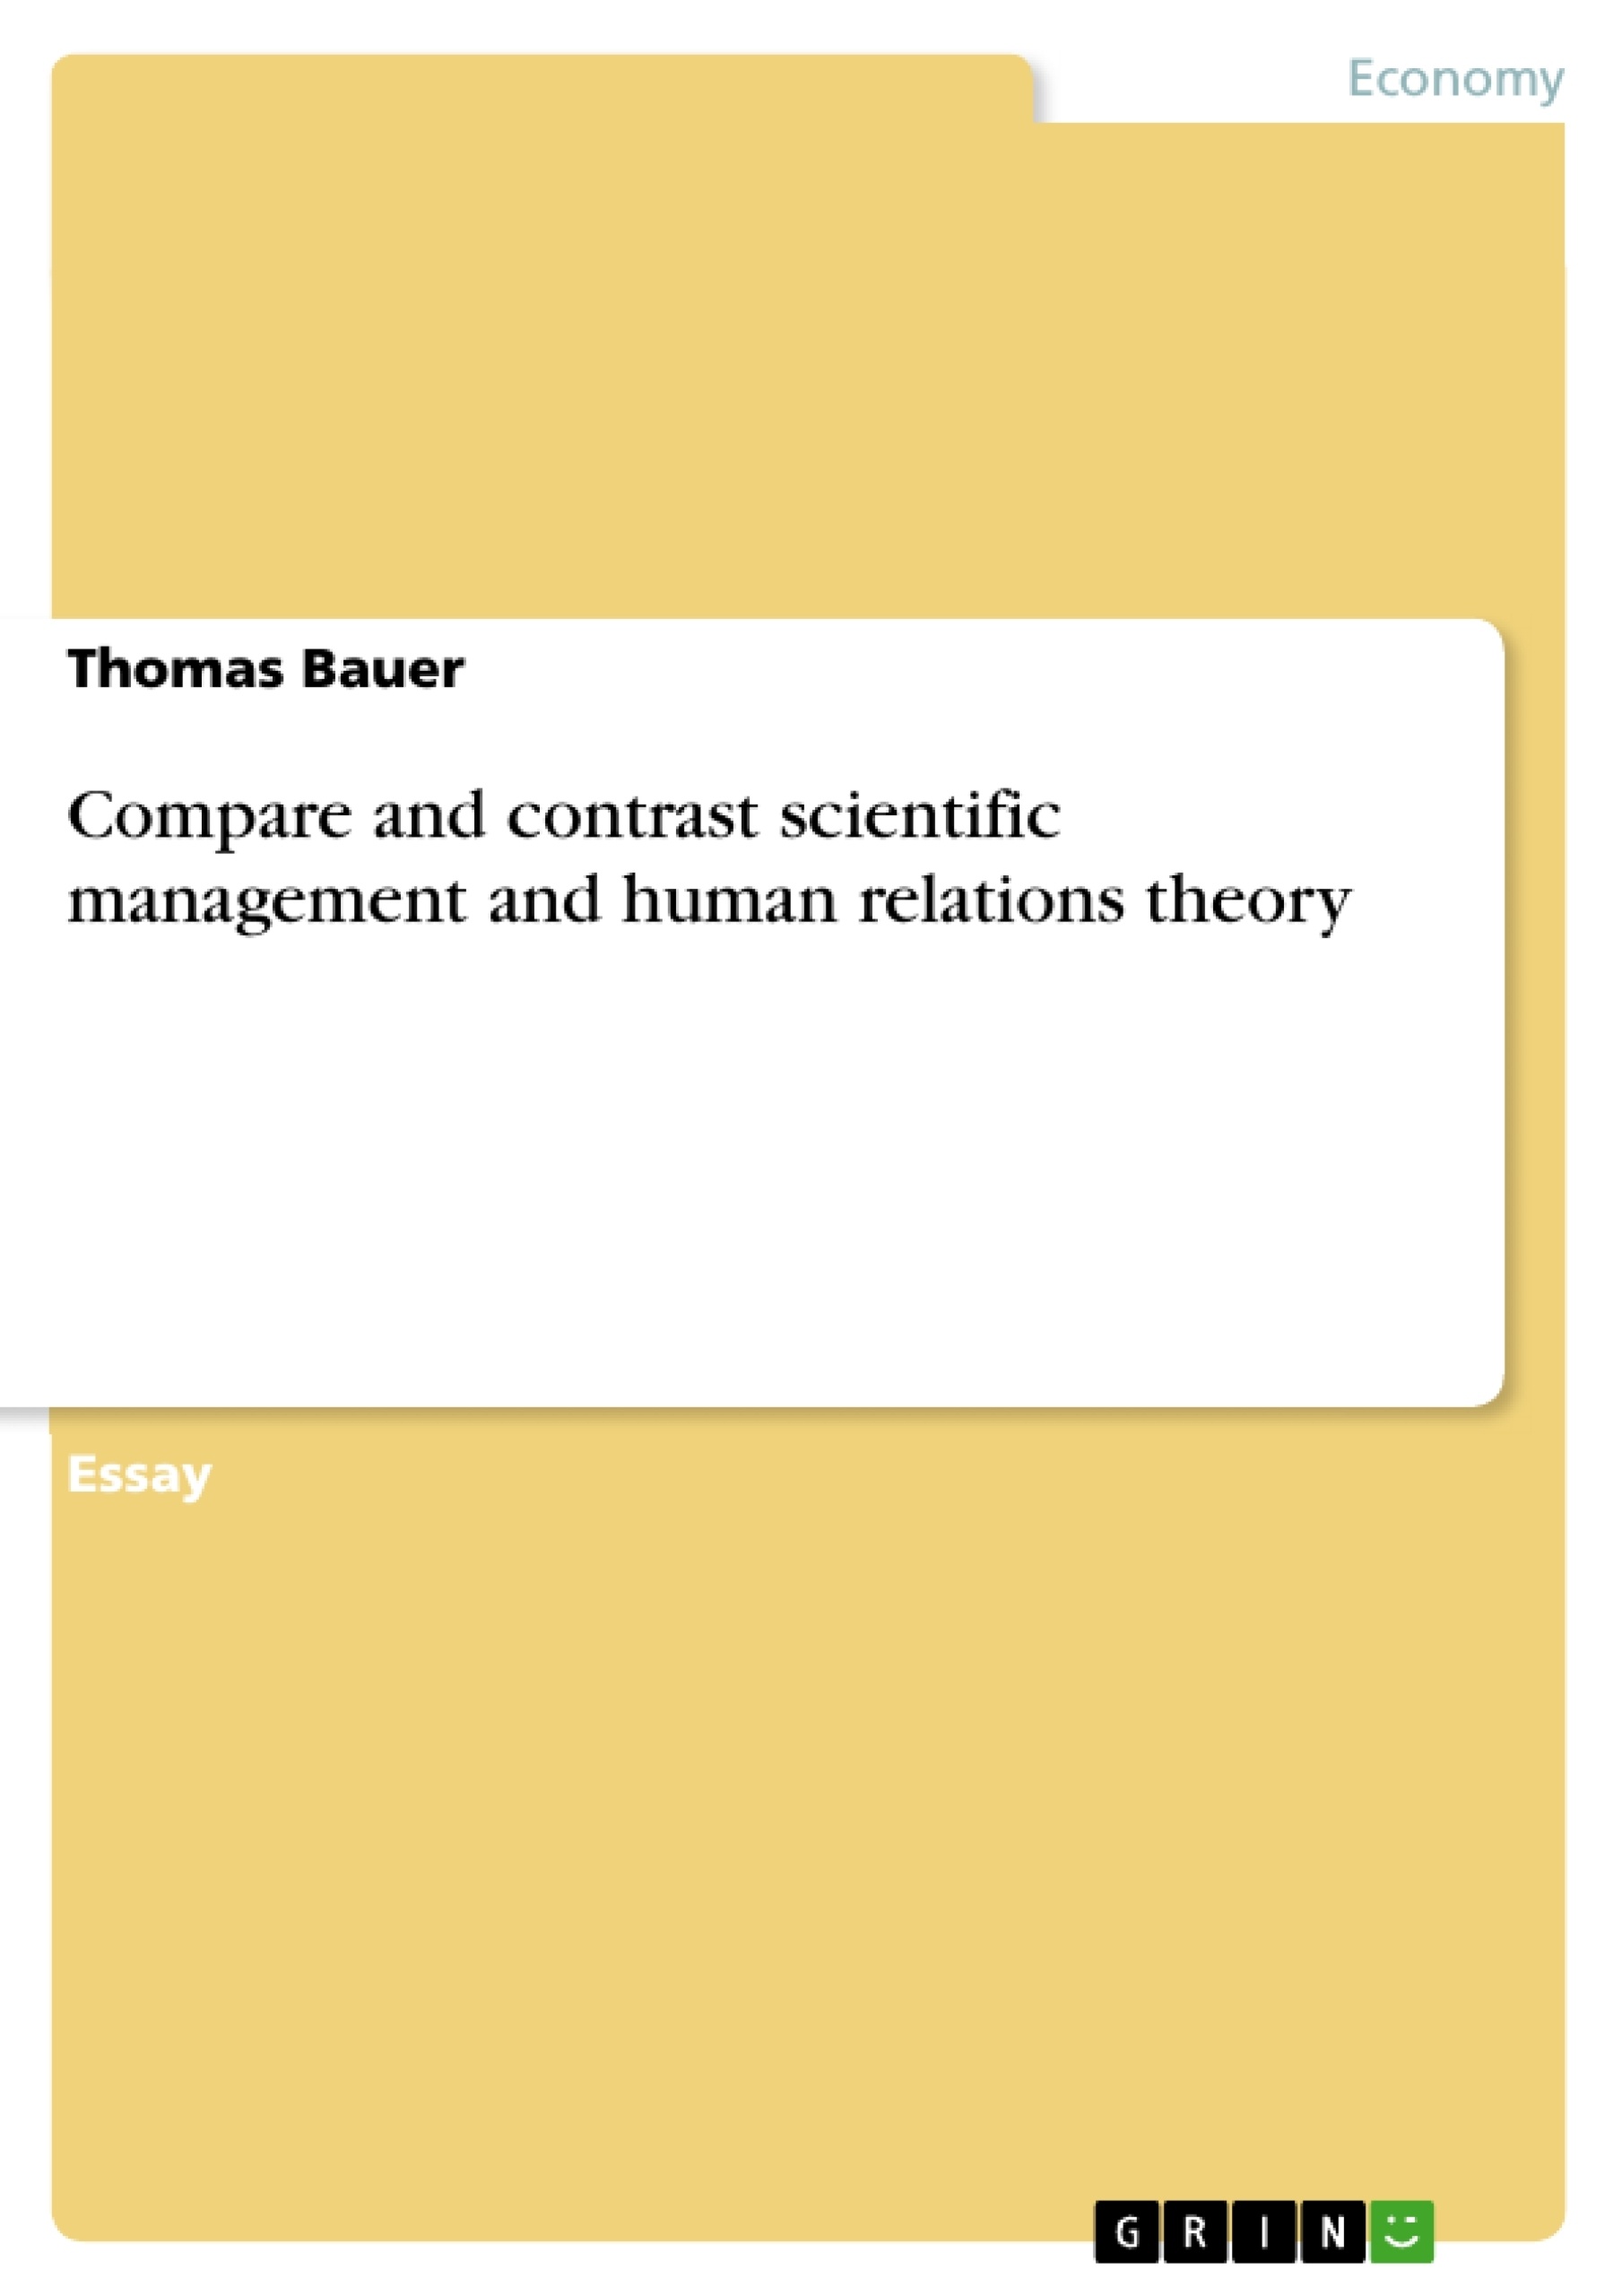 difference between scientific management and human relations